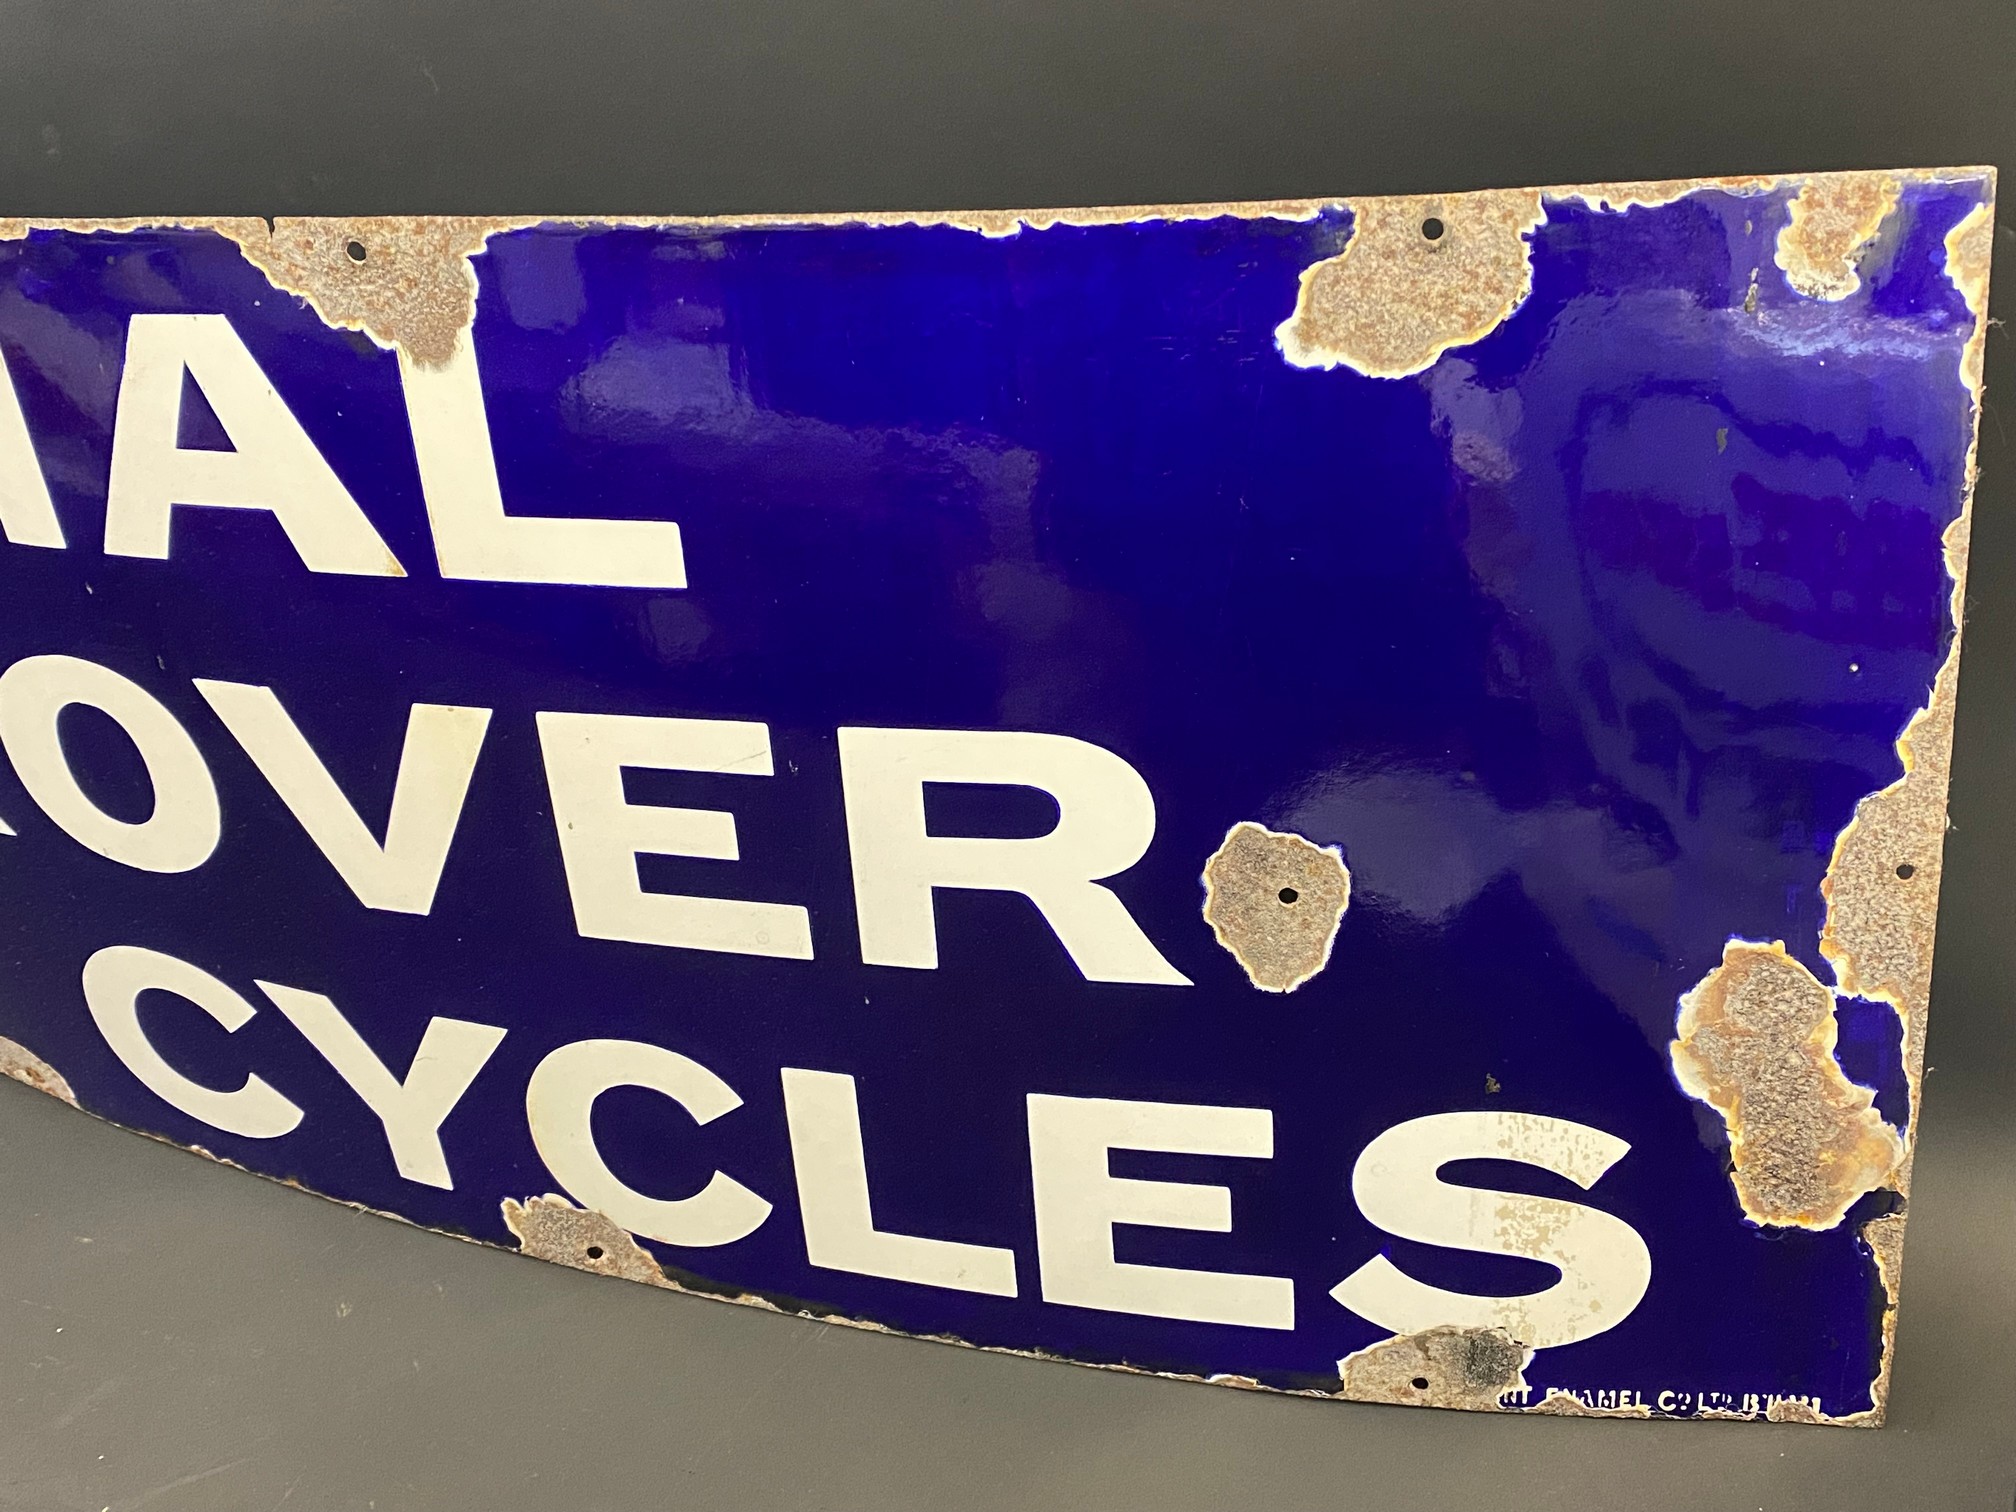 An Imperial Rover Cycles rectangular enamel sign, by Patent Enamel, dated January 1899, excellent - Image 4 of 5